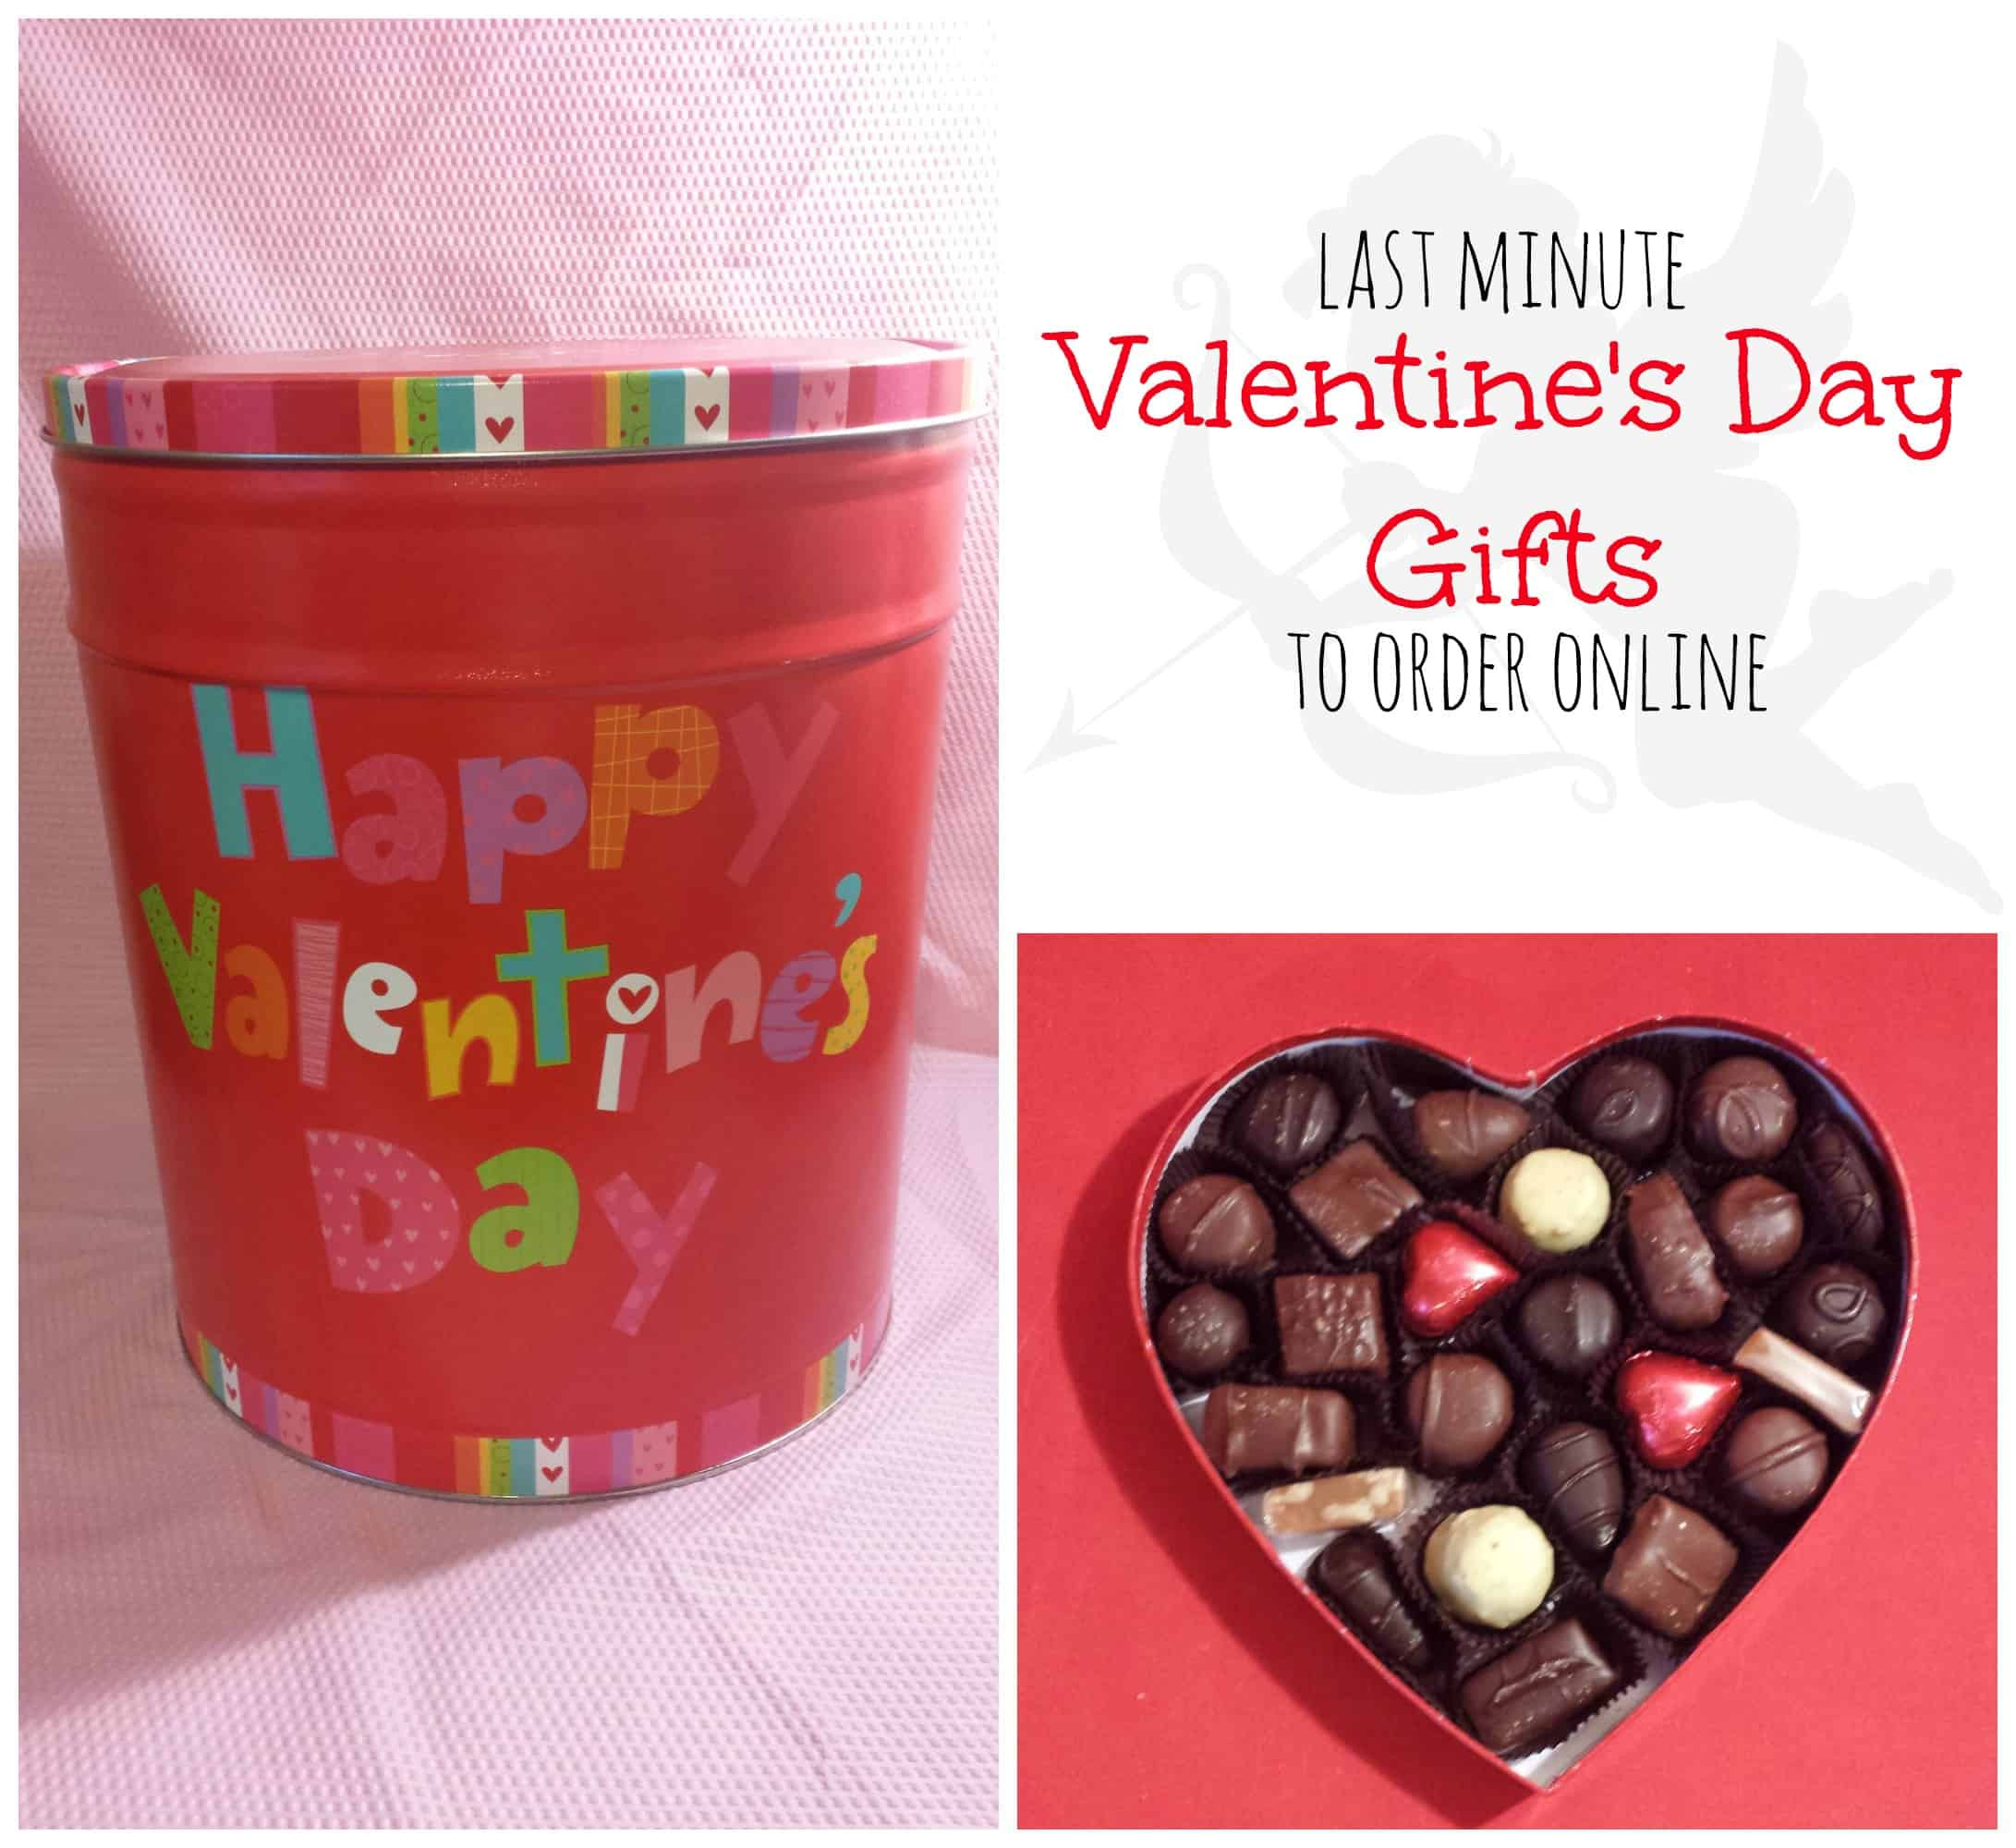 Valentines Day Gift Online
 Last Minute Valentine s Day Gifts to Order line